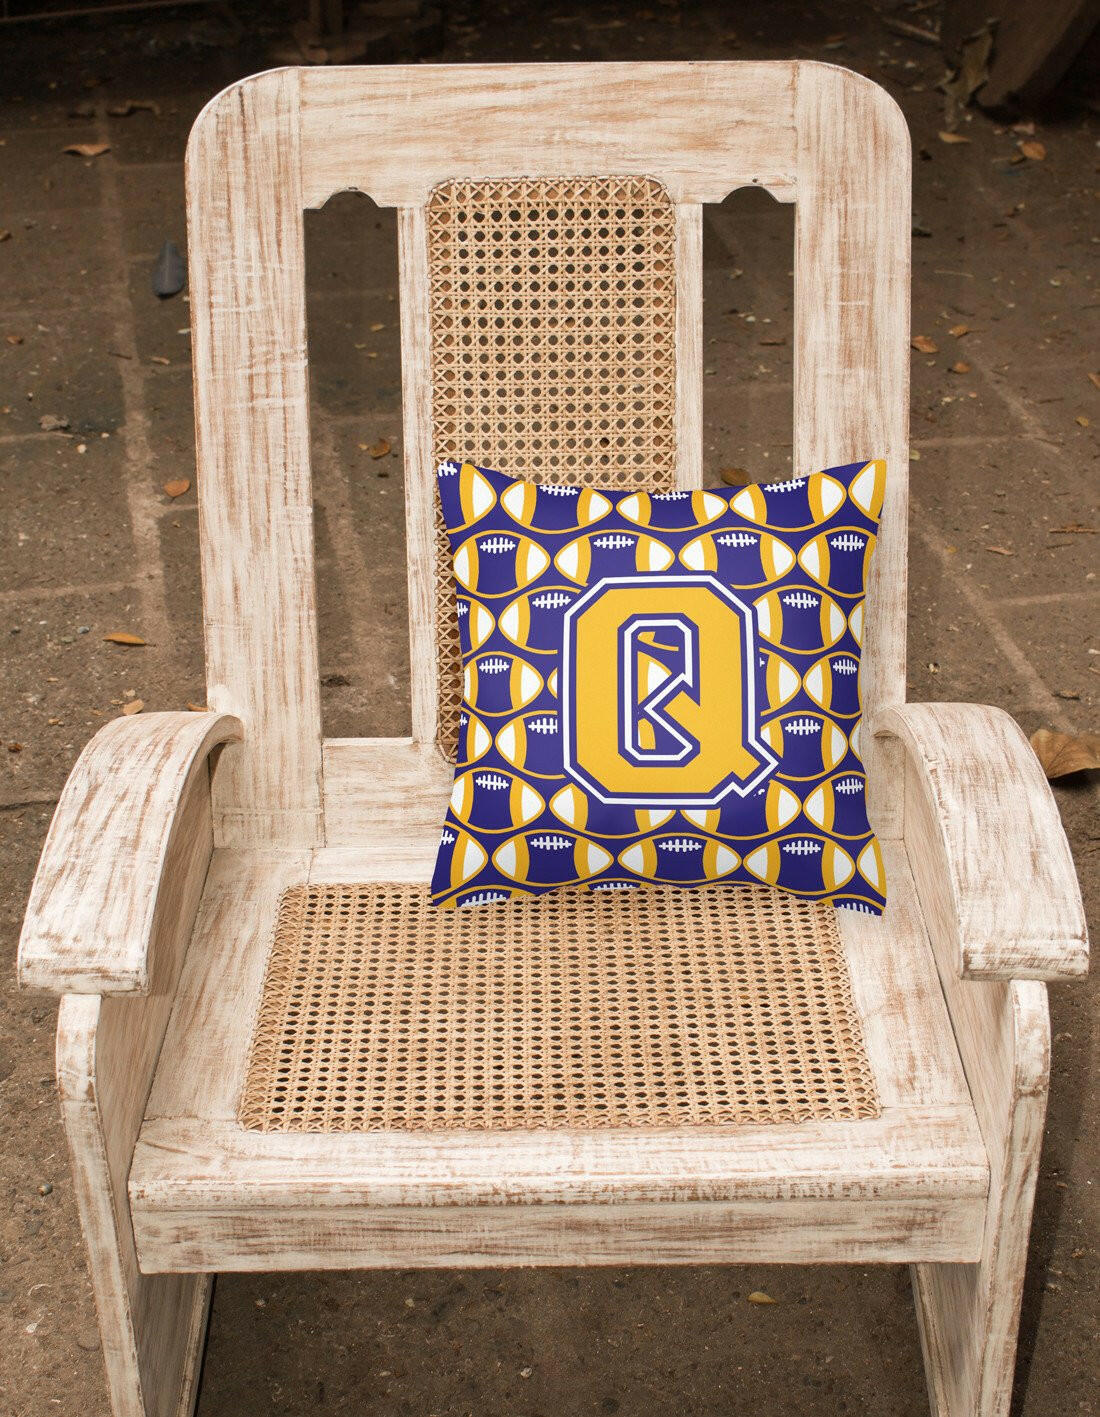 Letter Q Football Purple and Gold Fabric Decorative Pillow CJ1064-QPW1414 by Caroline's Treasures